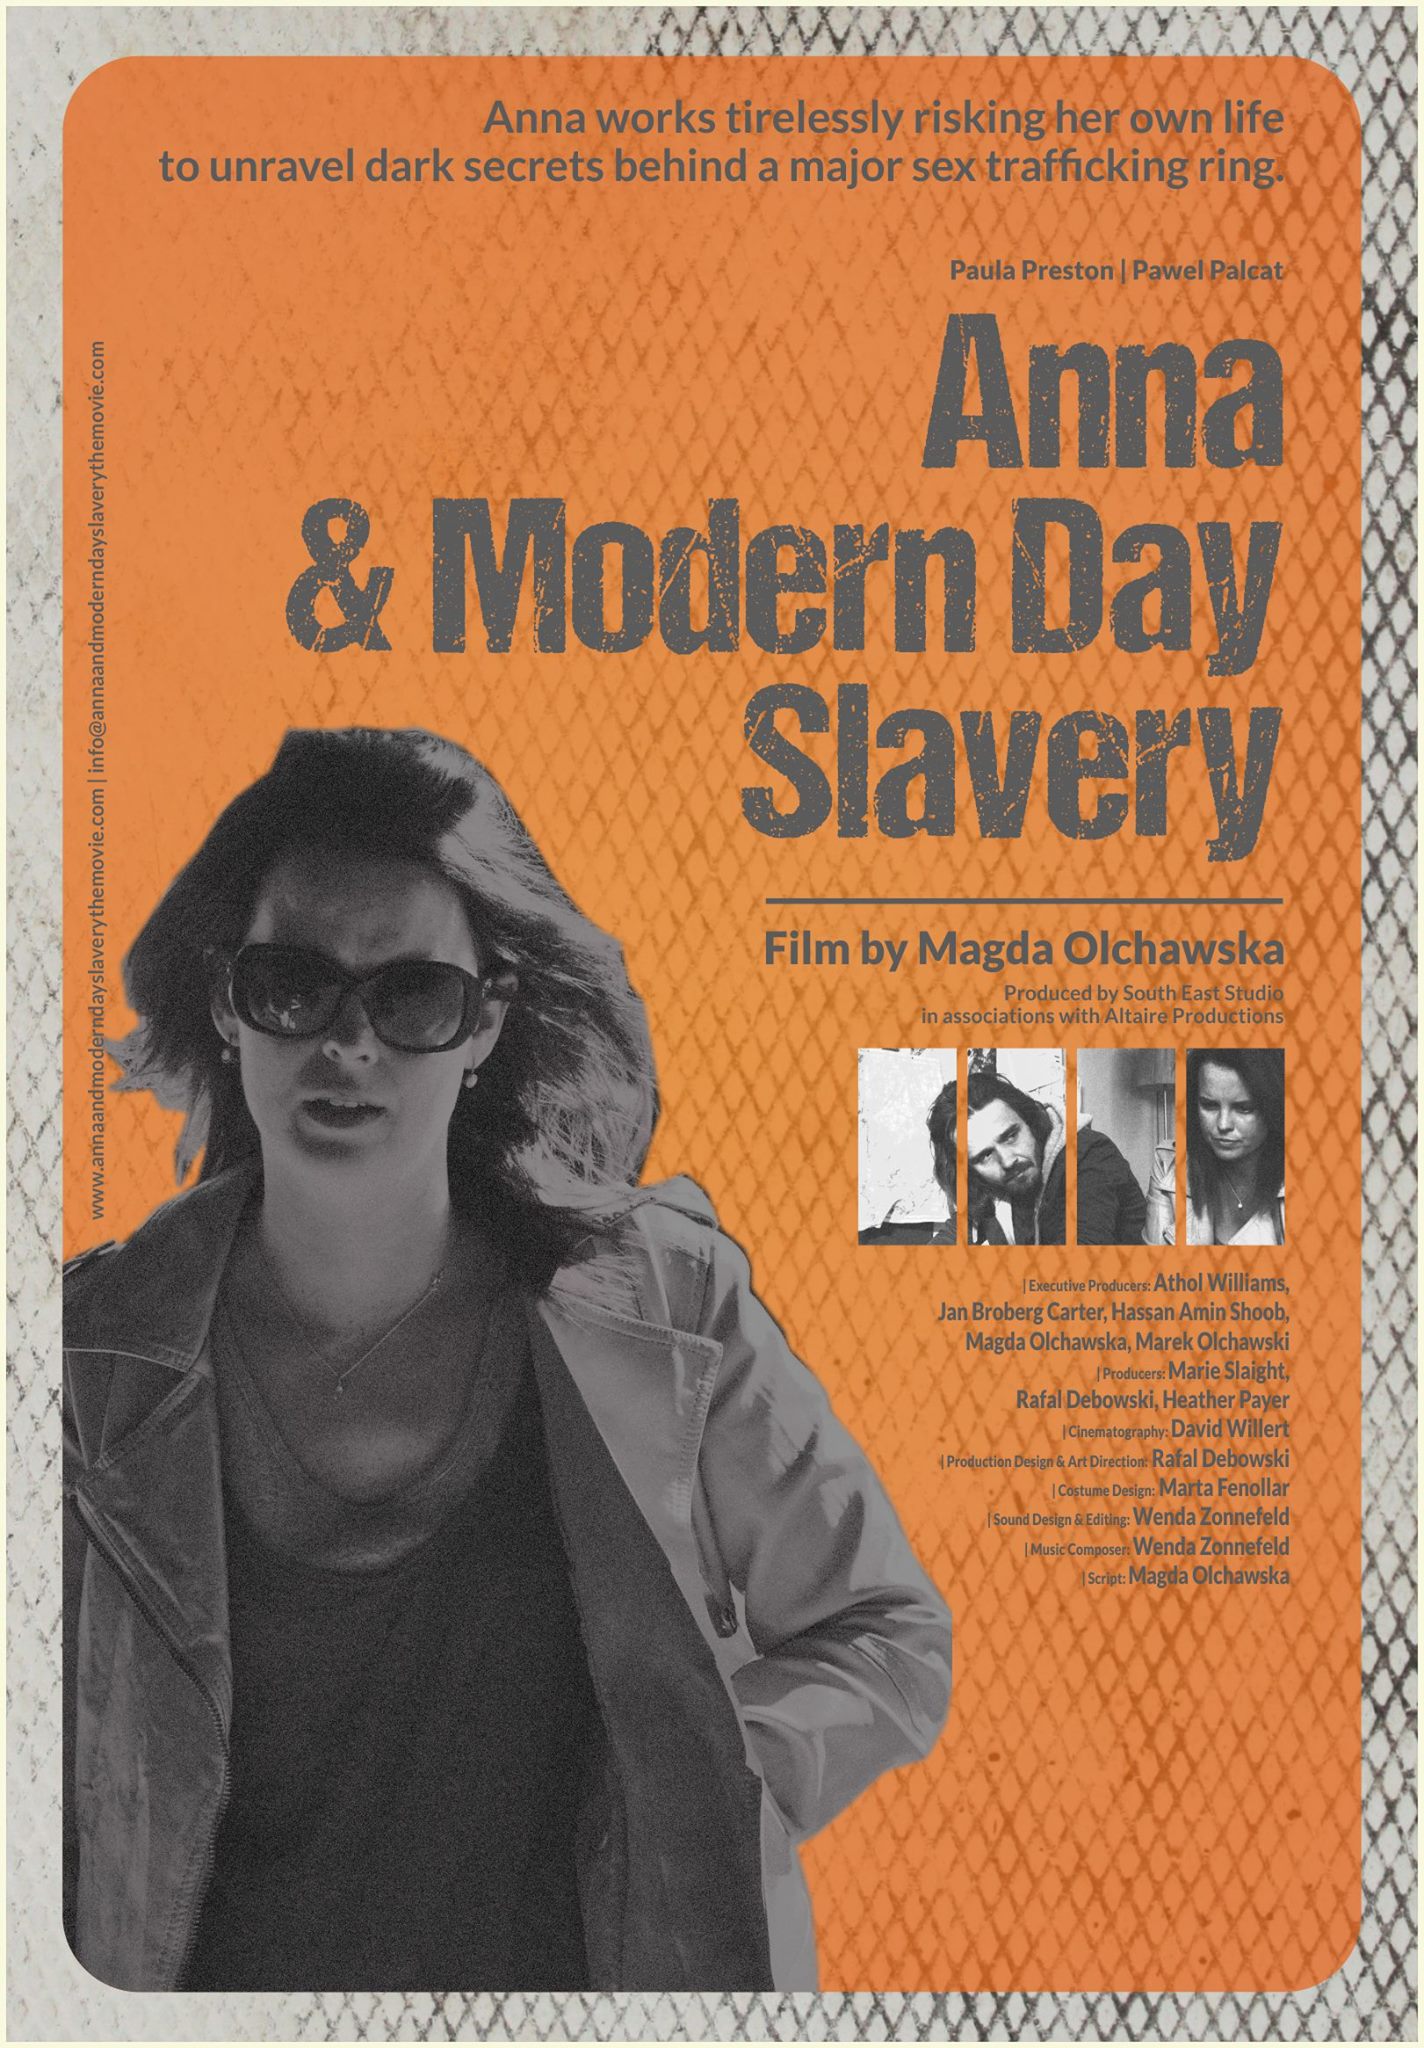 Anna & Modern Day Slavery official poster